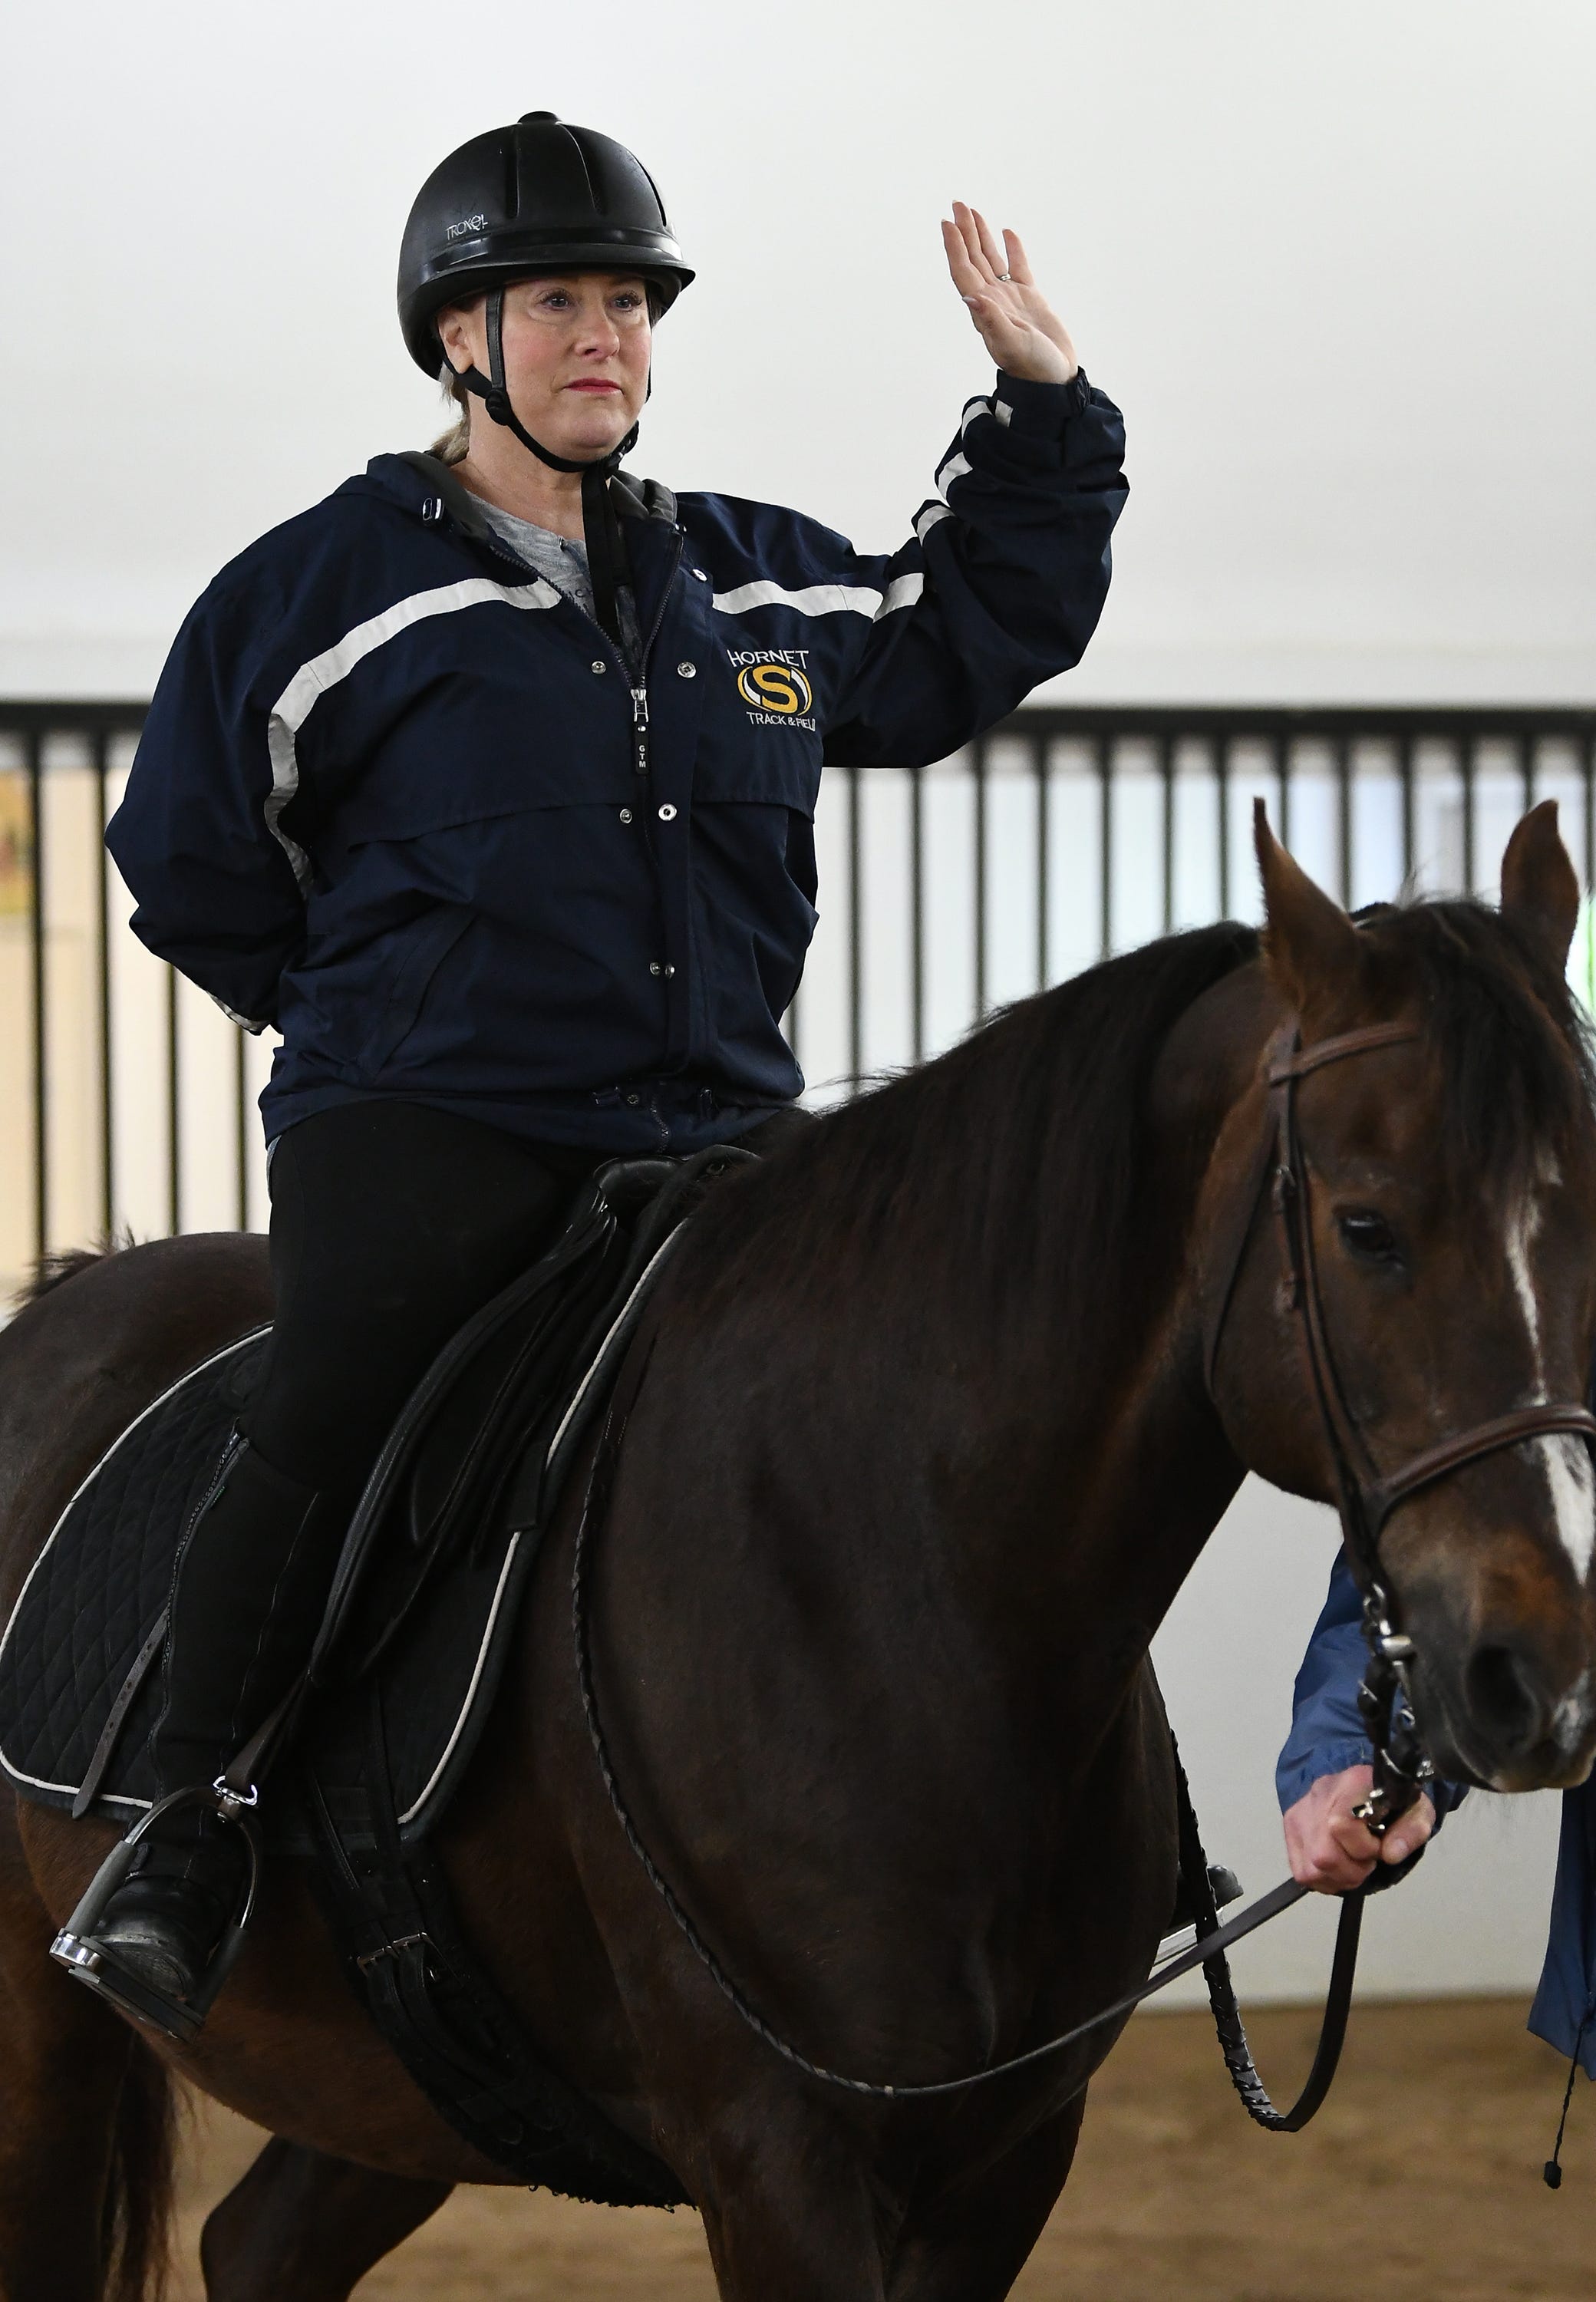 Michelle Witzig practices her balance atop the horse Hey Dobbs, by riding with no hands during her therapeutic riding session.